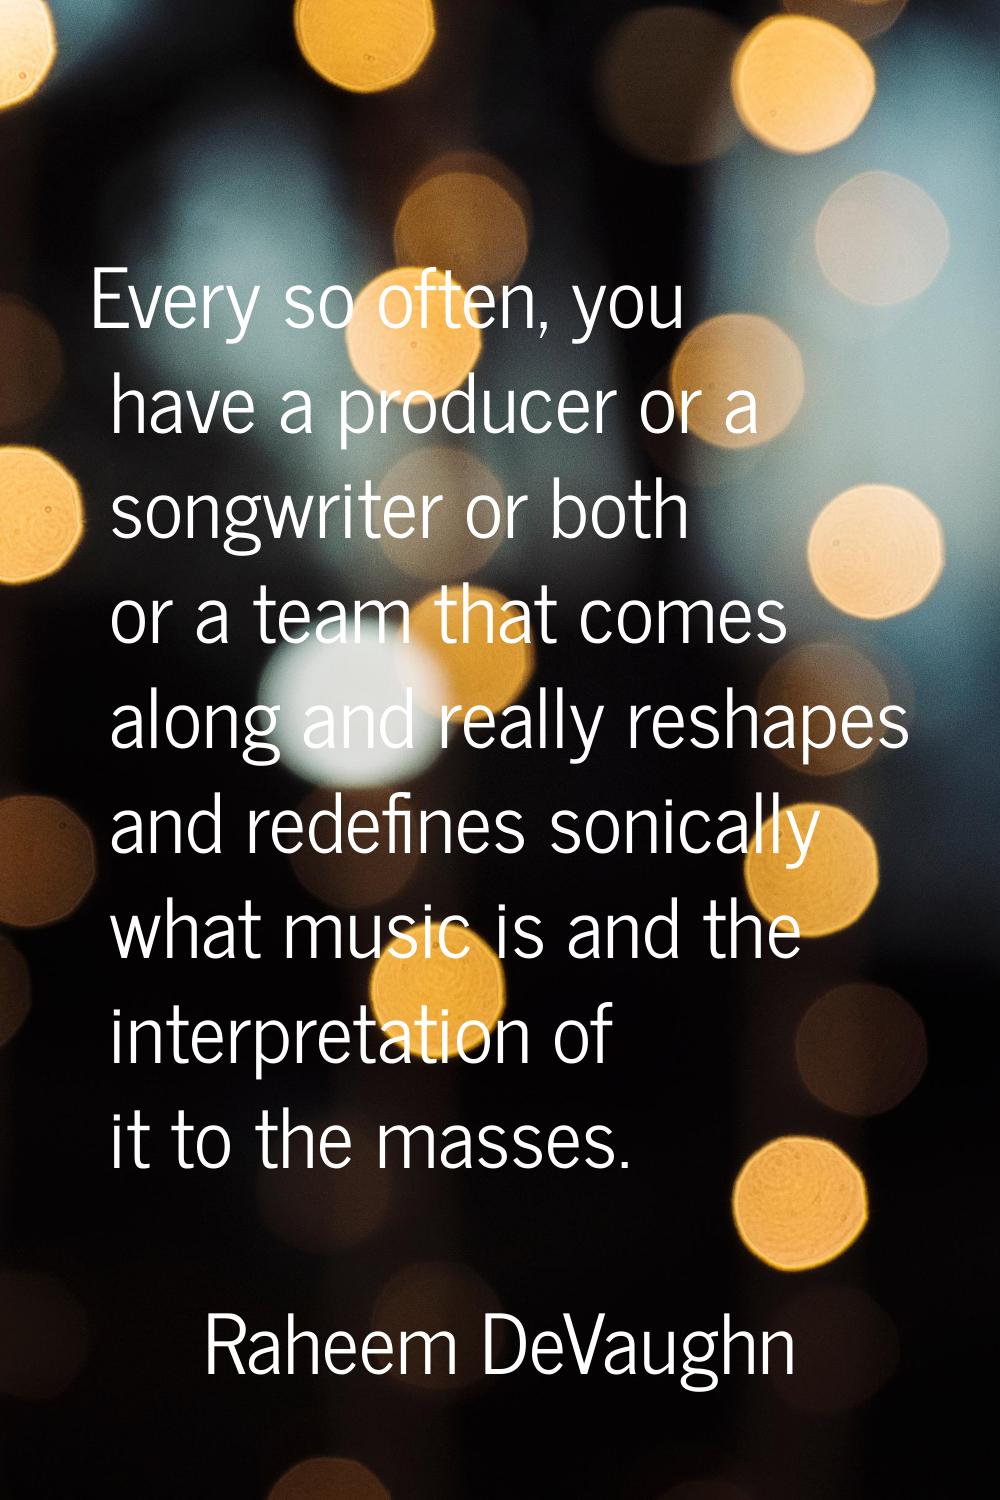 Every so often, you have a producer or a songwriter or both or a team that comes along and really r